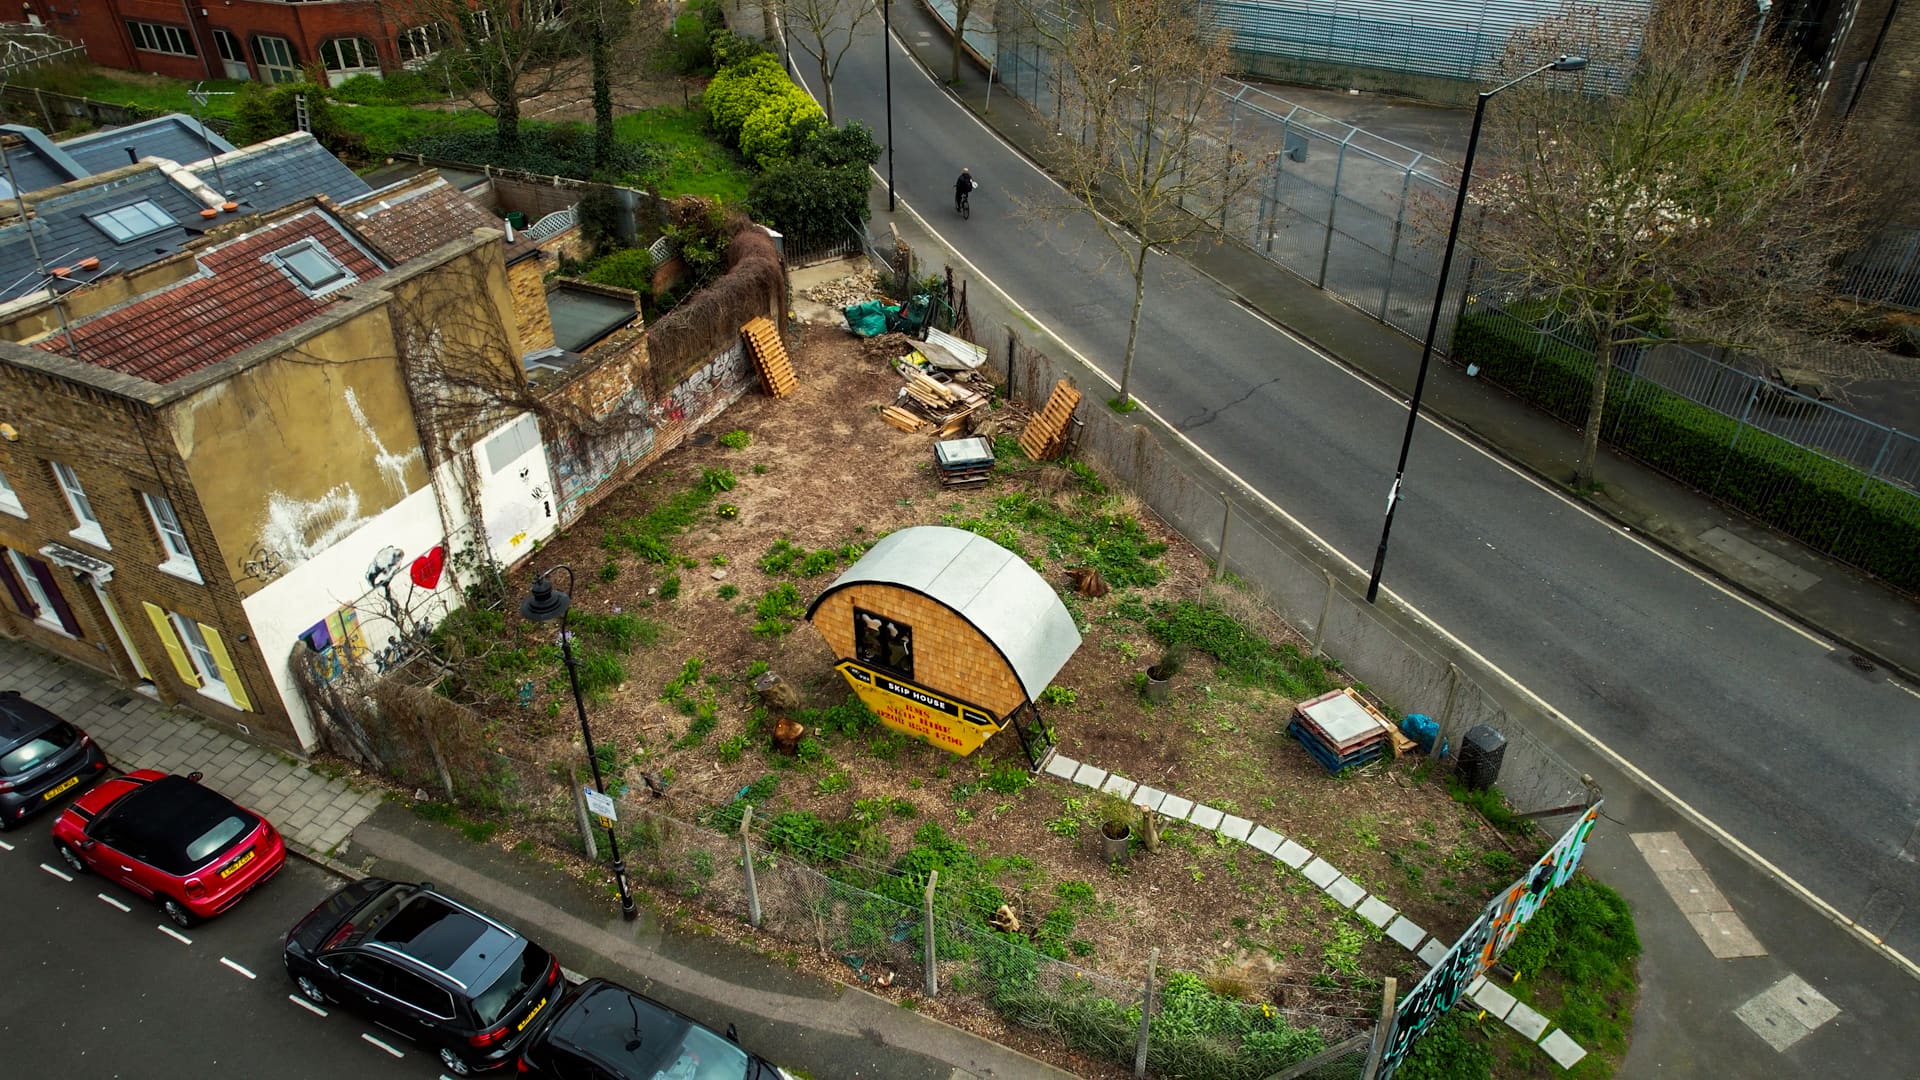 Harrison's tiny home sits on an empty lot in South London. The land was granted to him by an arts charity called Antepavilion.